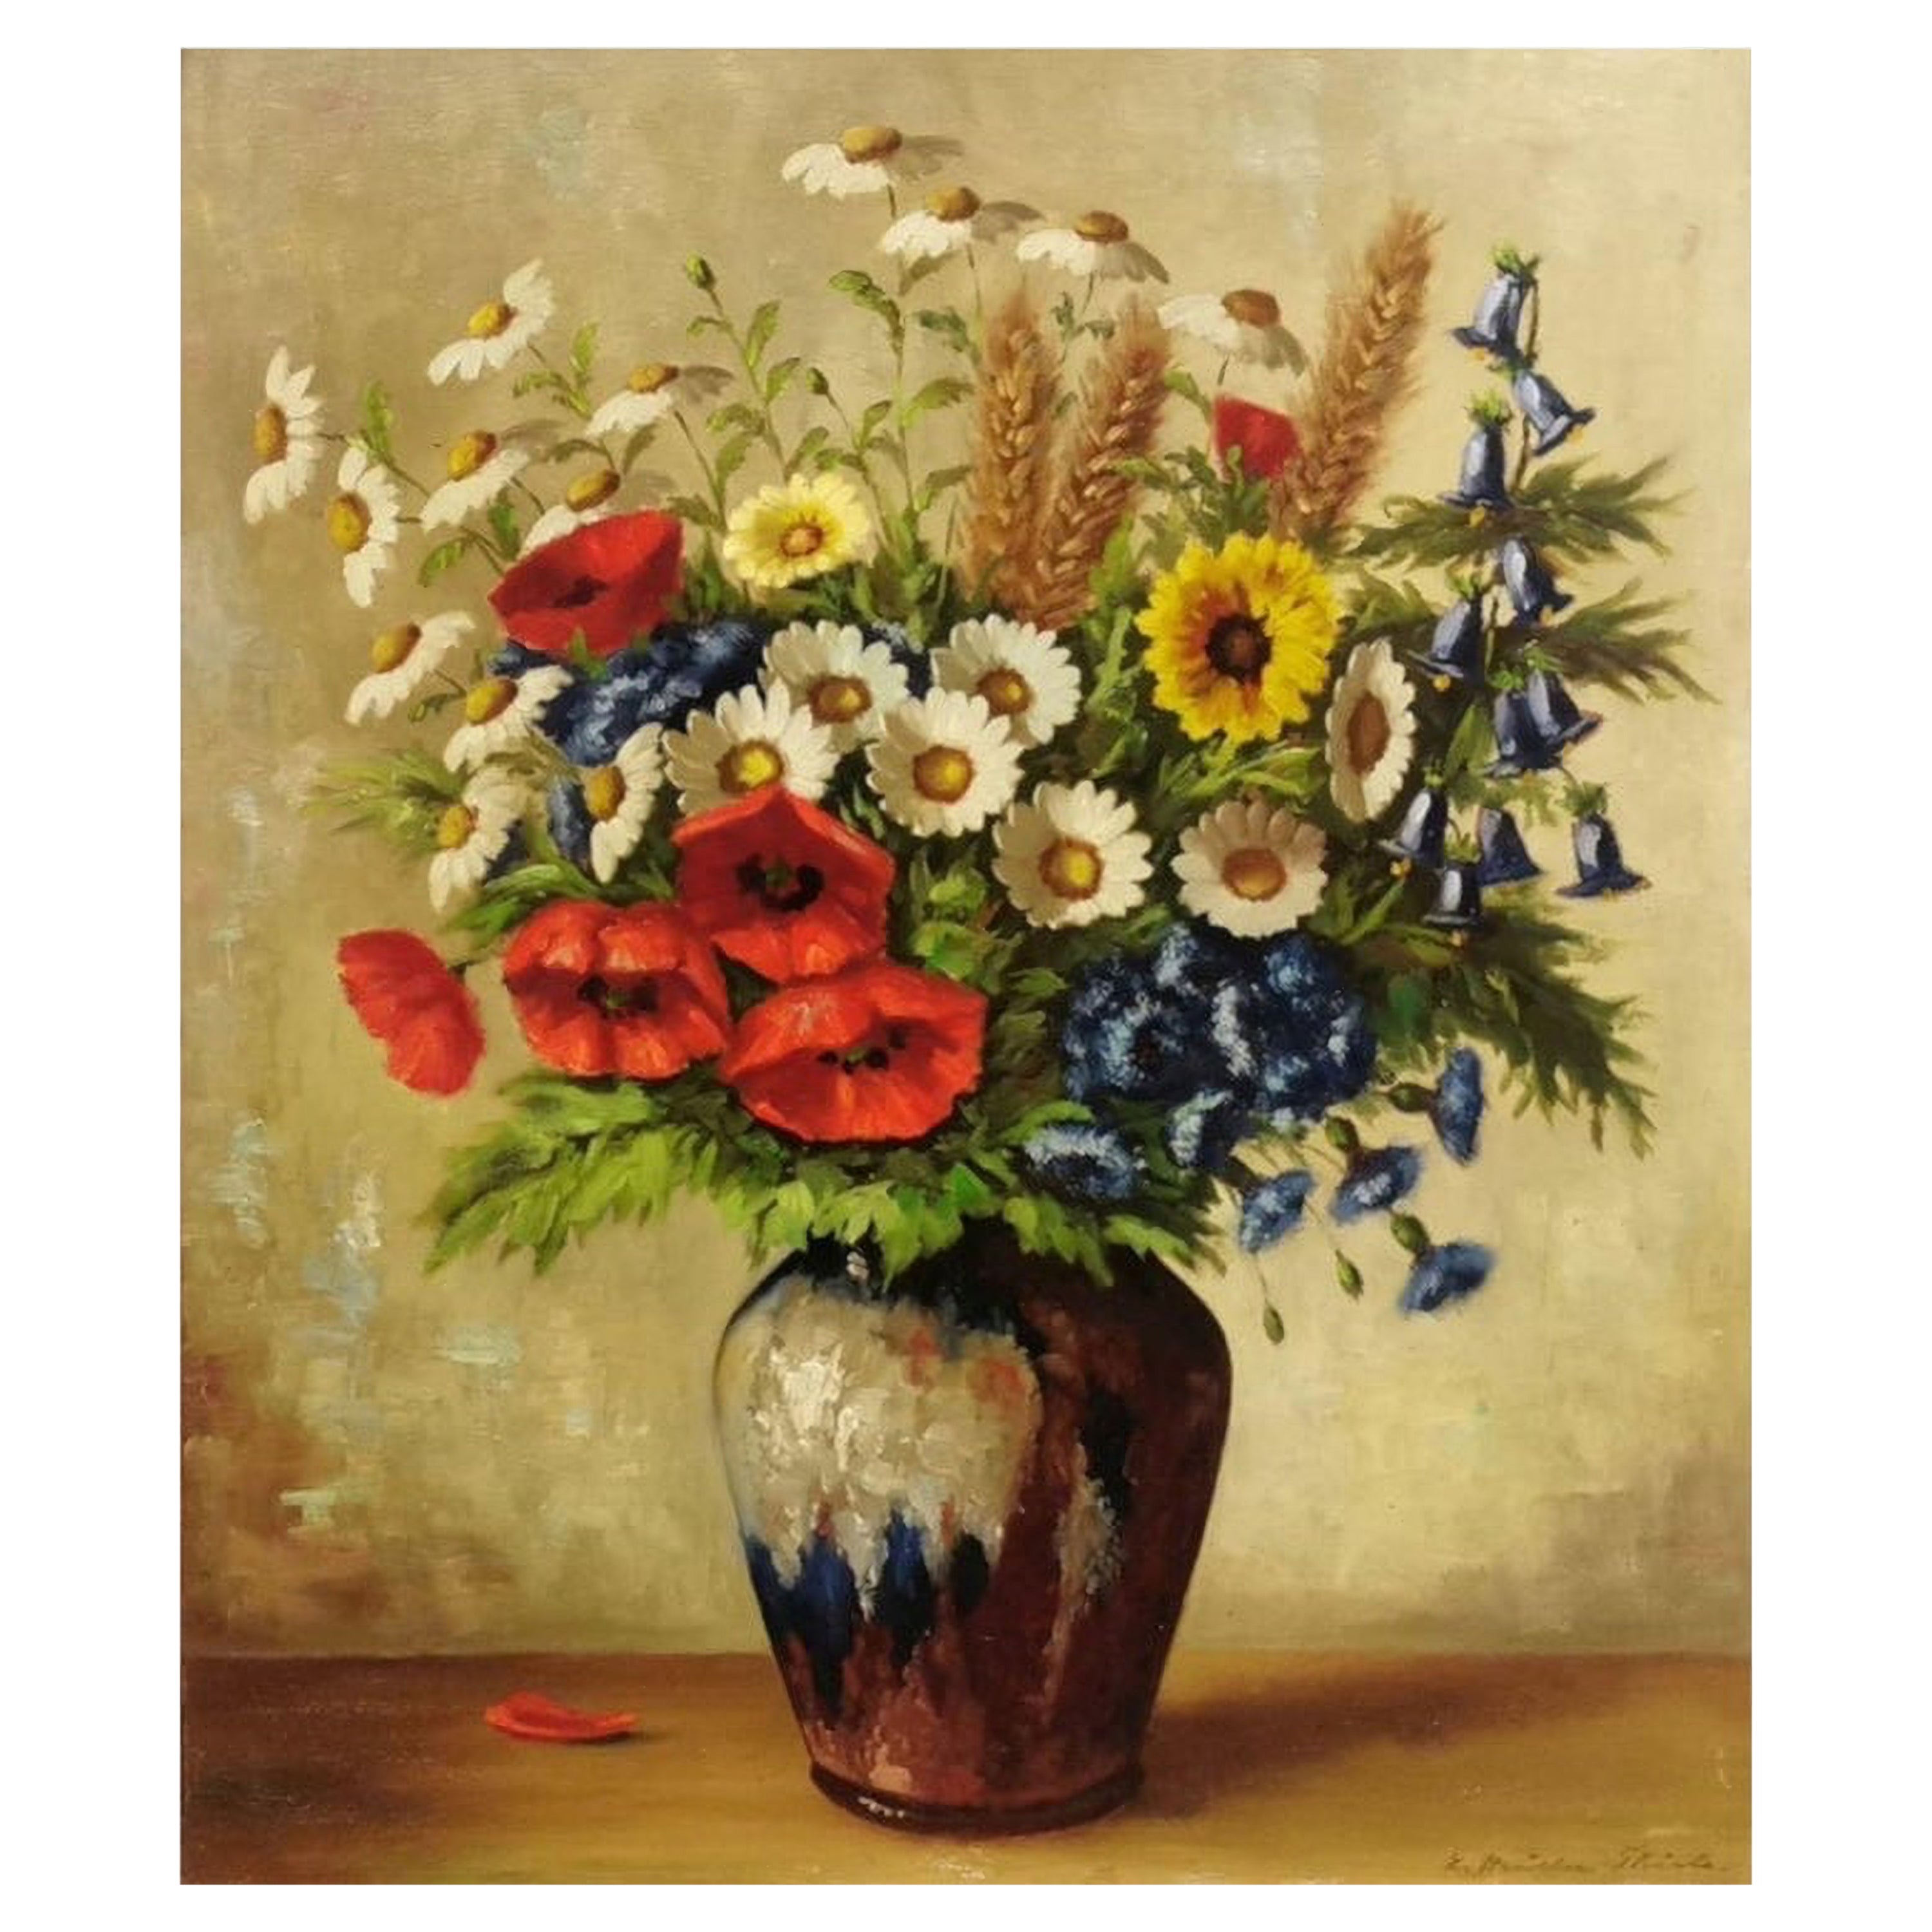 German Painter of the 19th Century "Flower Still Life" For Sale